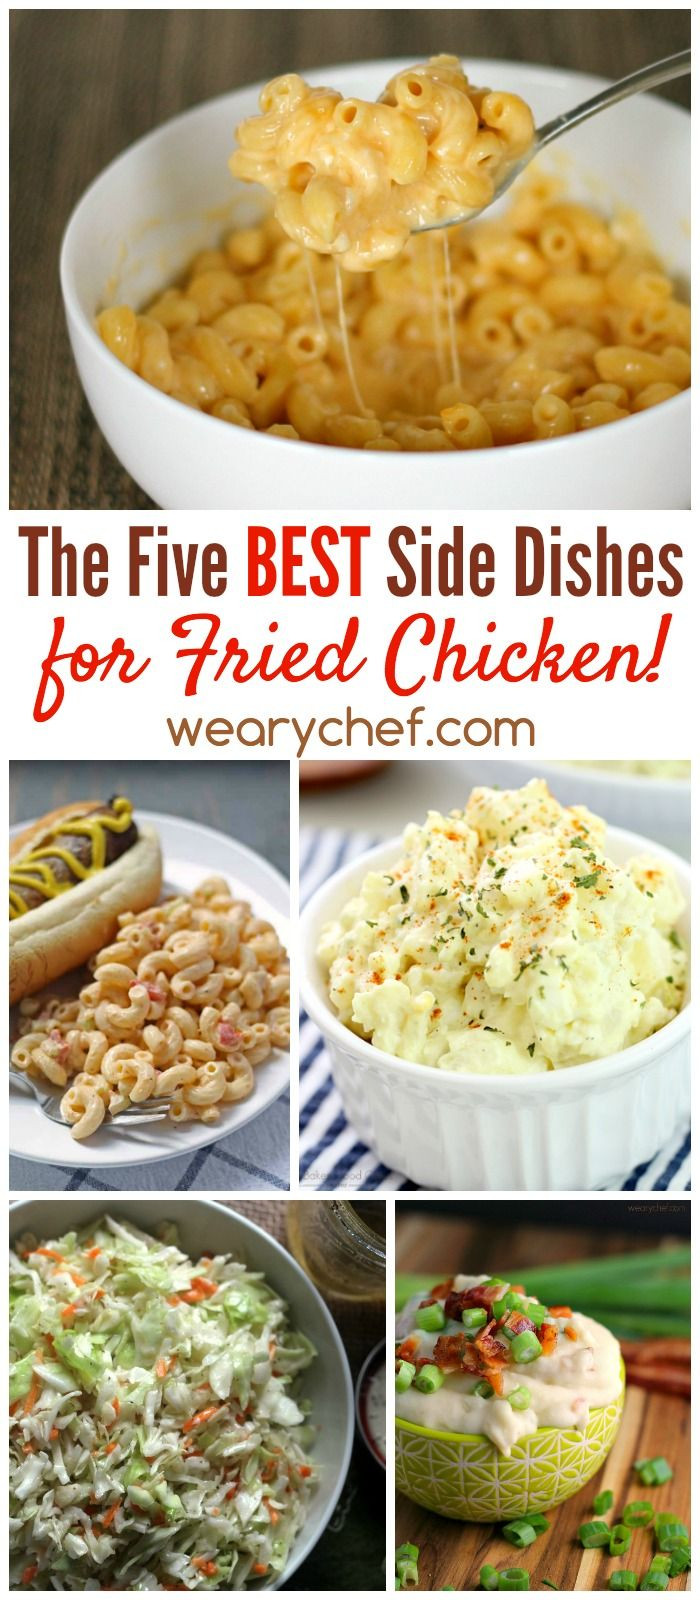 Healthy Sides For Fried Chicken
 Everyone loves fried chicken but you need one of these